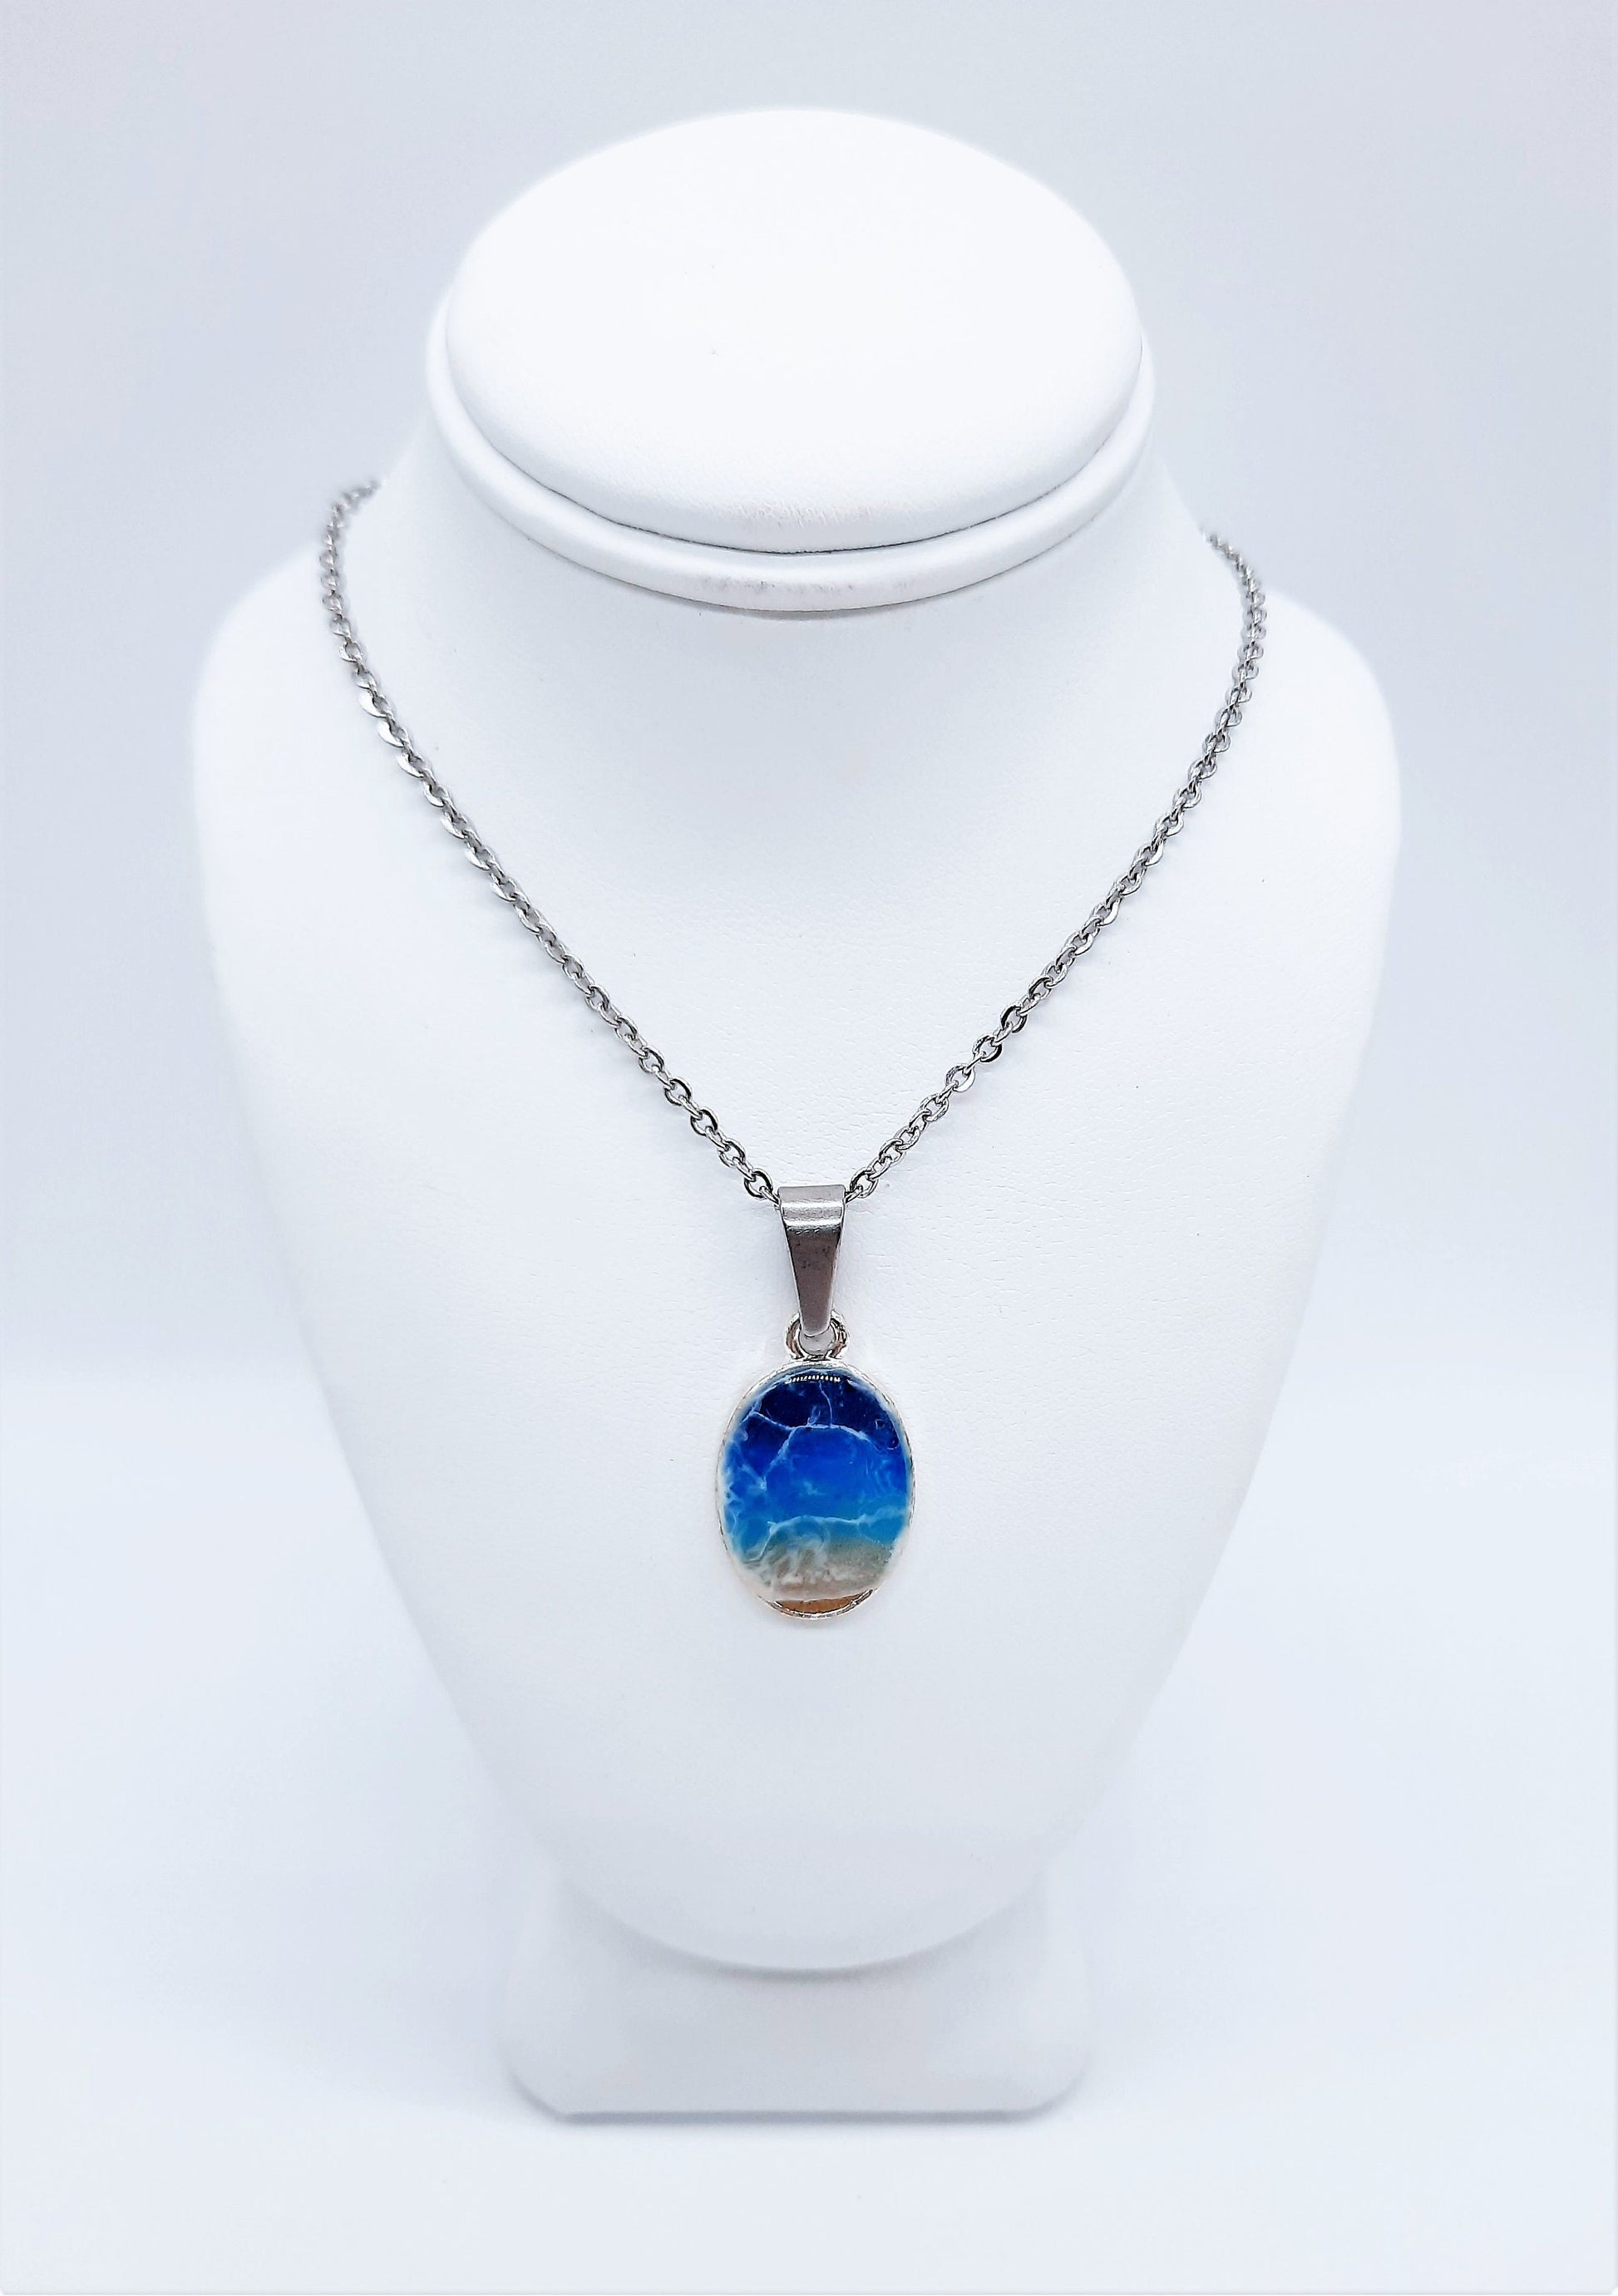 Resin Waves Small Oval Shaped Ocean Pendant / Beach Scene Necklace, Handmade Made with Resin & Real Sand - One of a Kind - Not a Photograph!